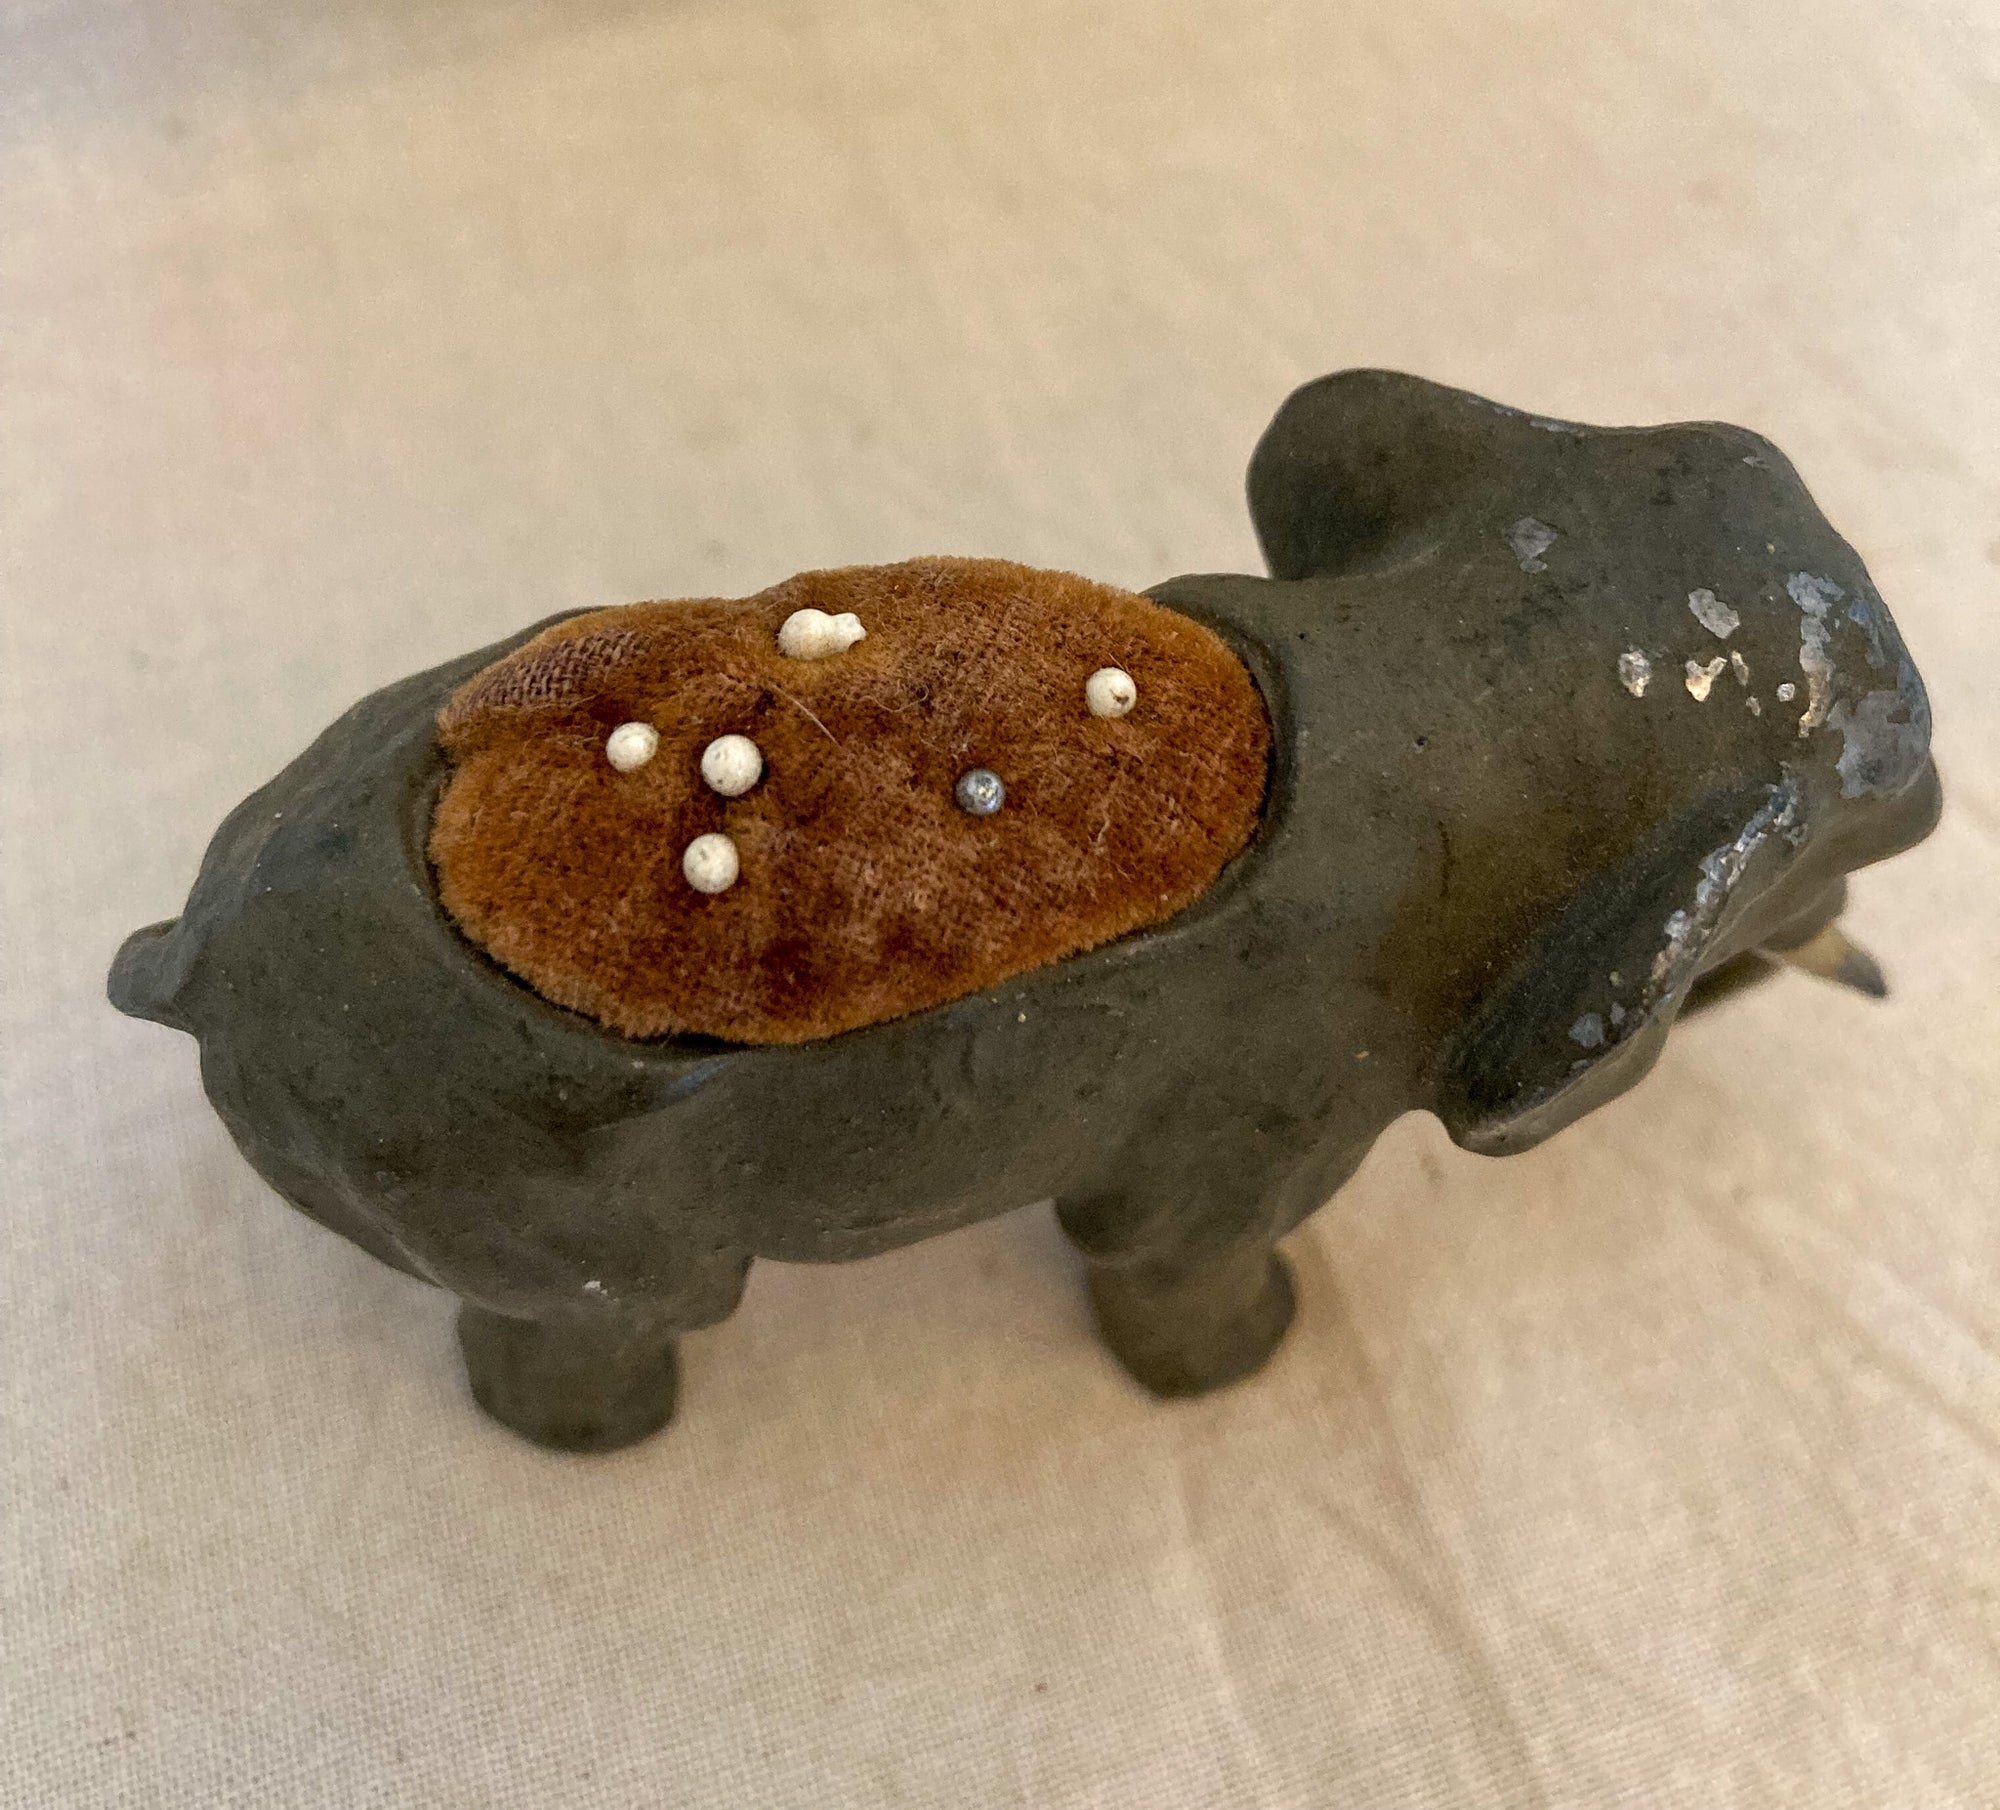 1880’s Cast Lead Elephant Pin Cushion, Made in Germany